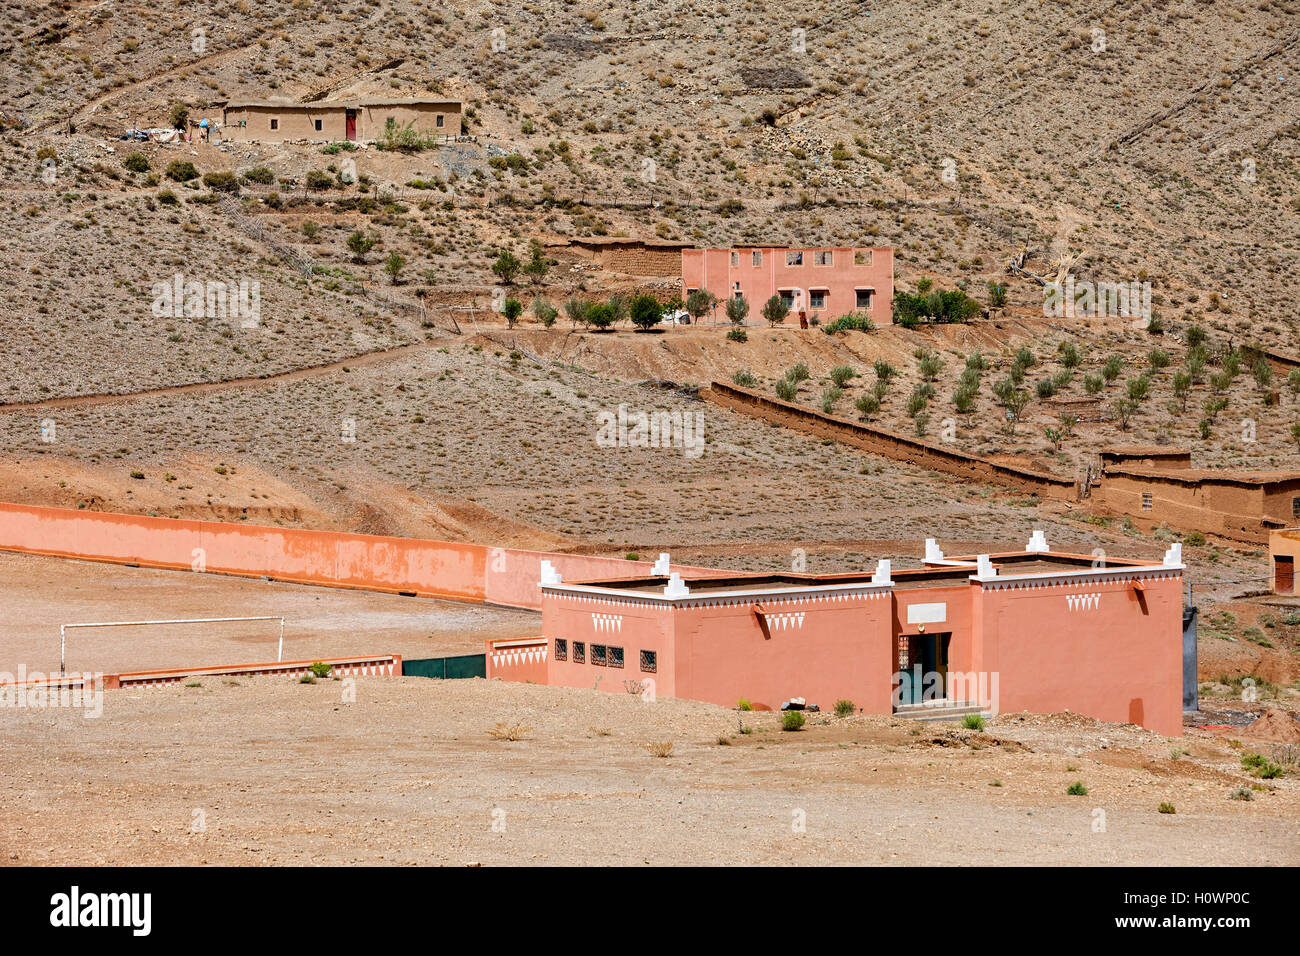 Dades Gorge, Morocco.  Village Houses on Hillside.  Village Soccer Field in Front. Stock Photo